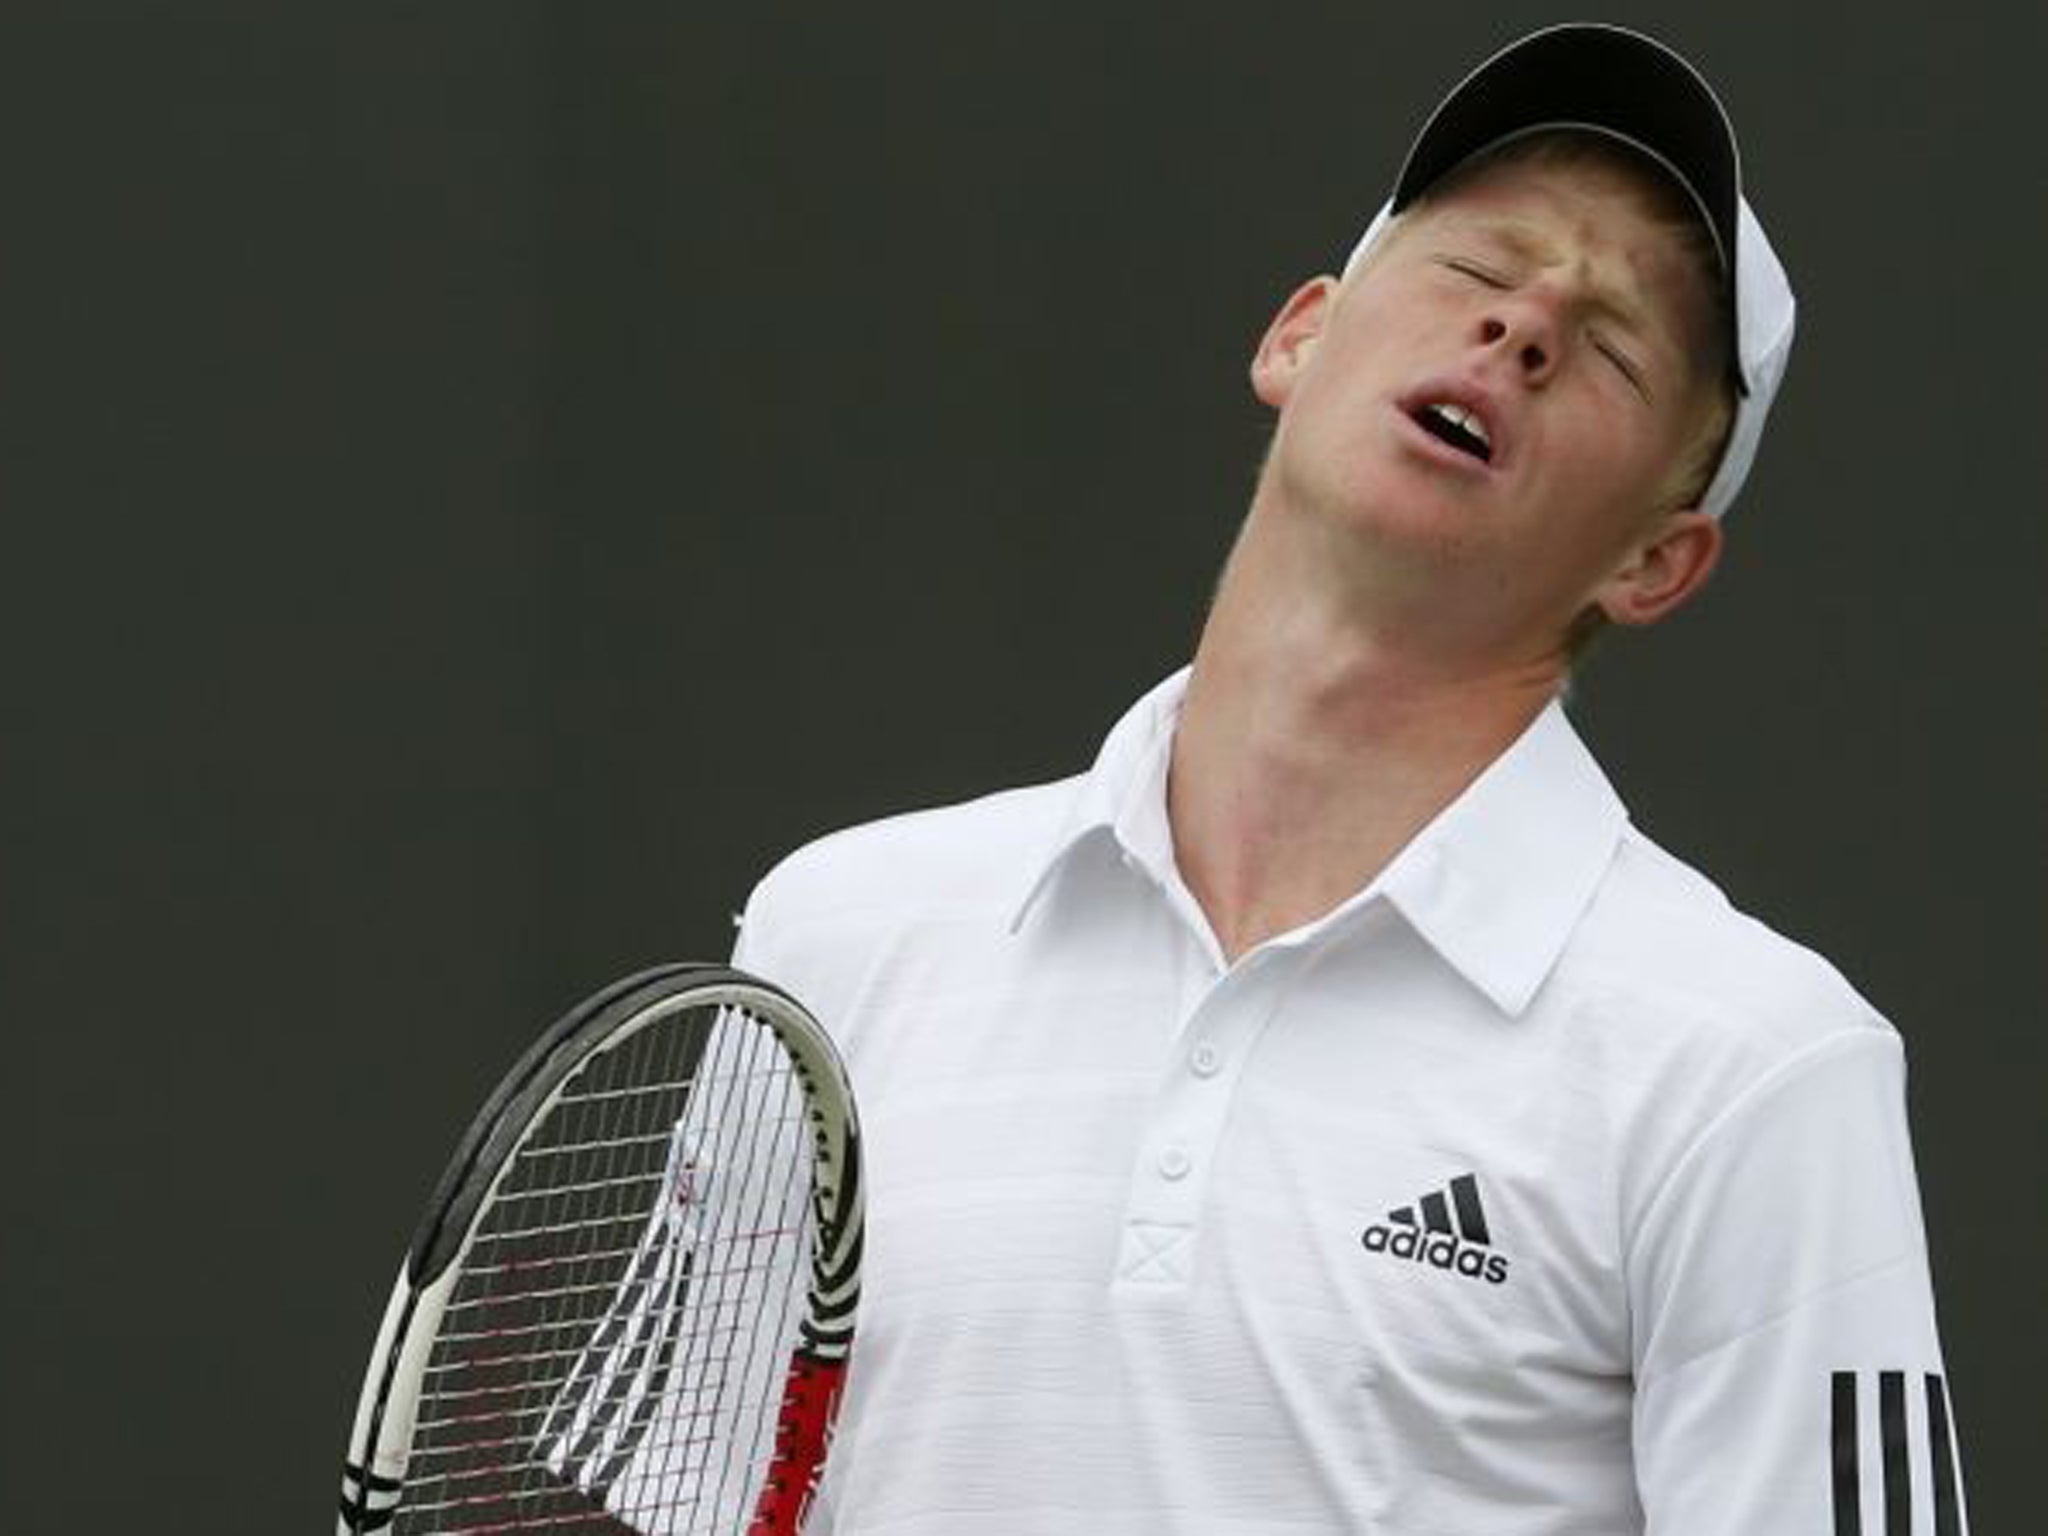 Kyle Edmund of Britain reacts during his men's singles tennis match against Jerzy Janowicz